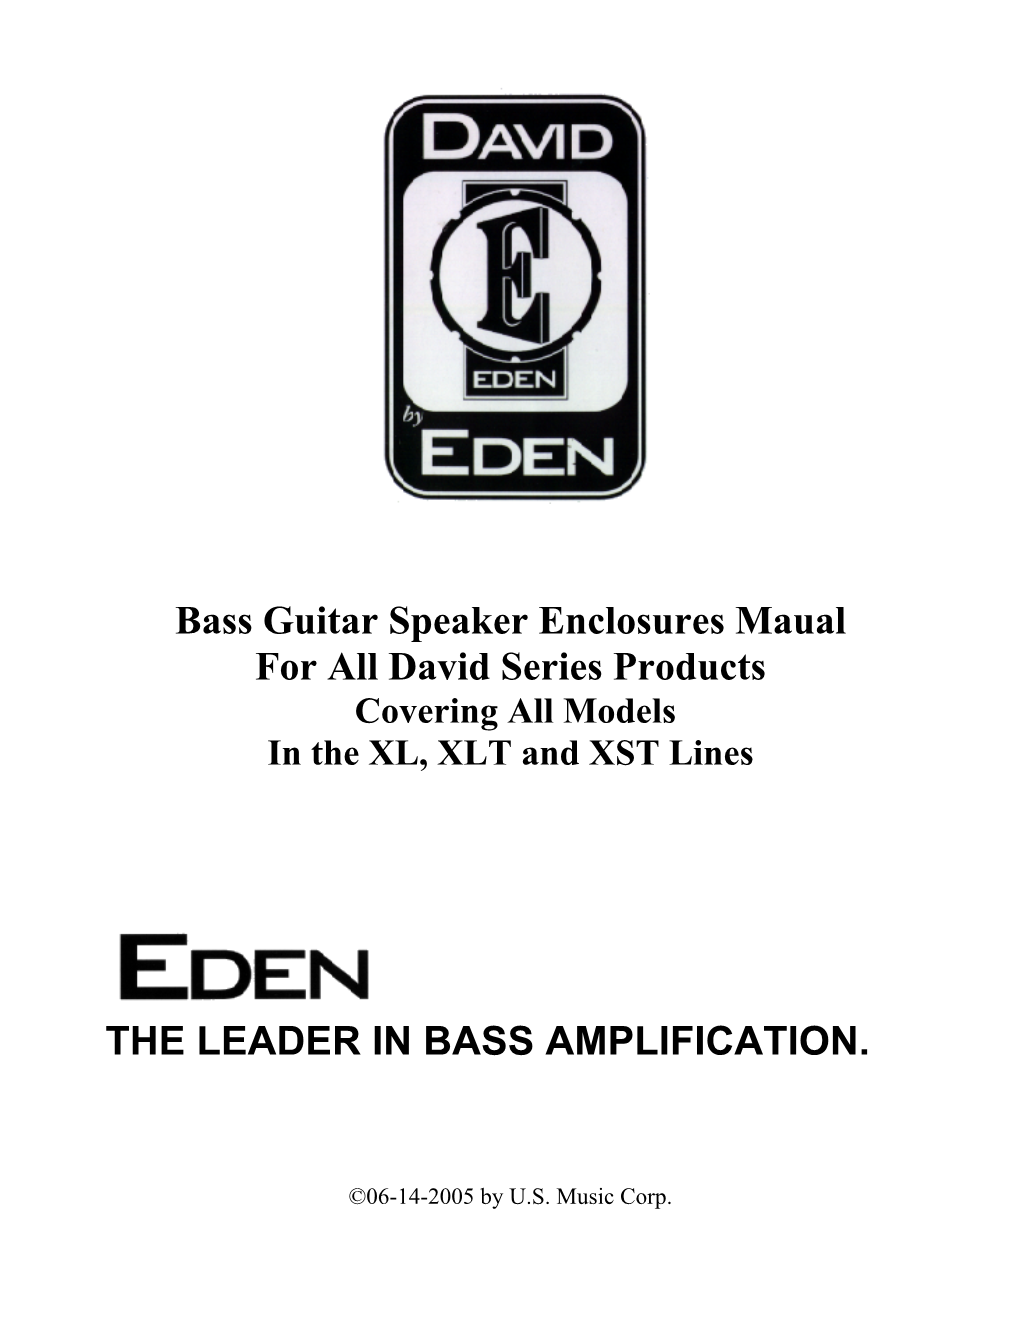 Bass Guitar Speaker Enclosures Maual for All David Series Products Covering All Models in the XL, XLT and XST Lines